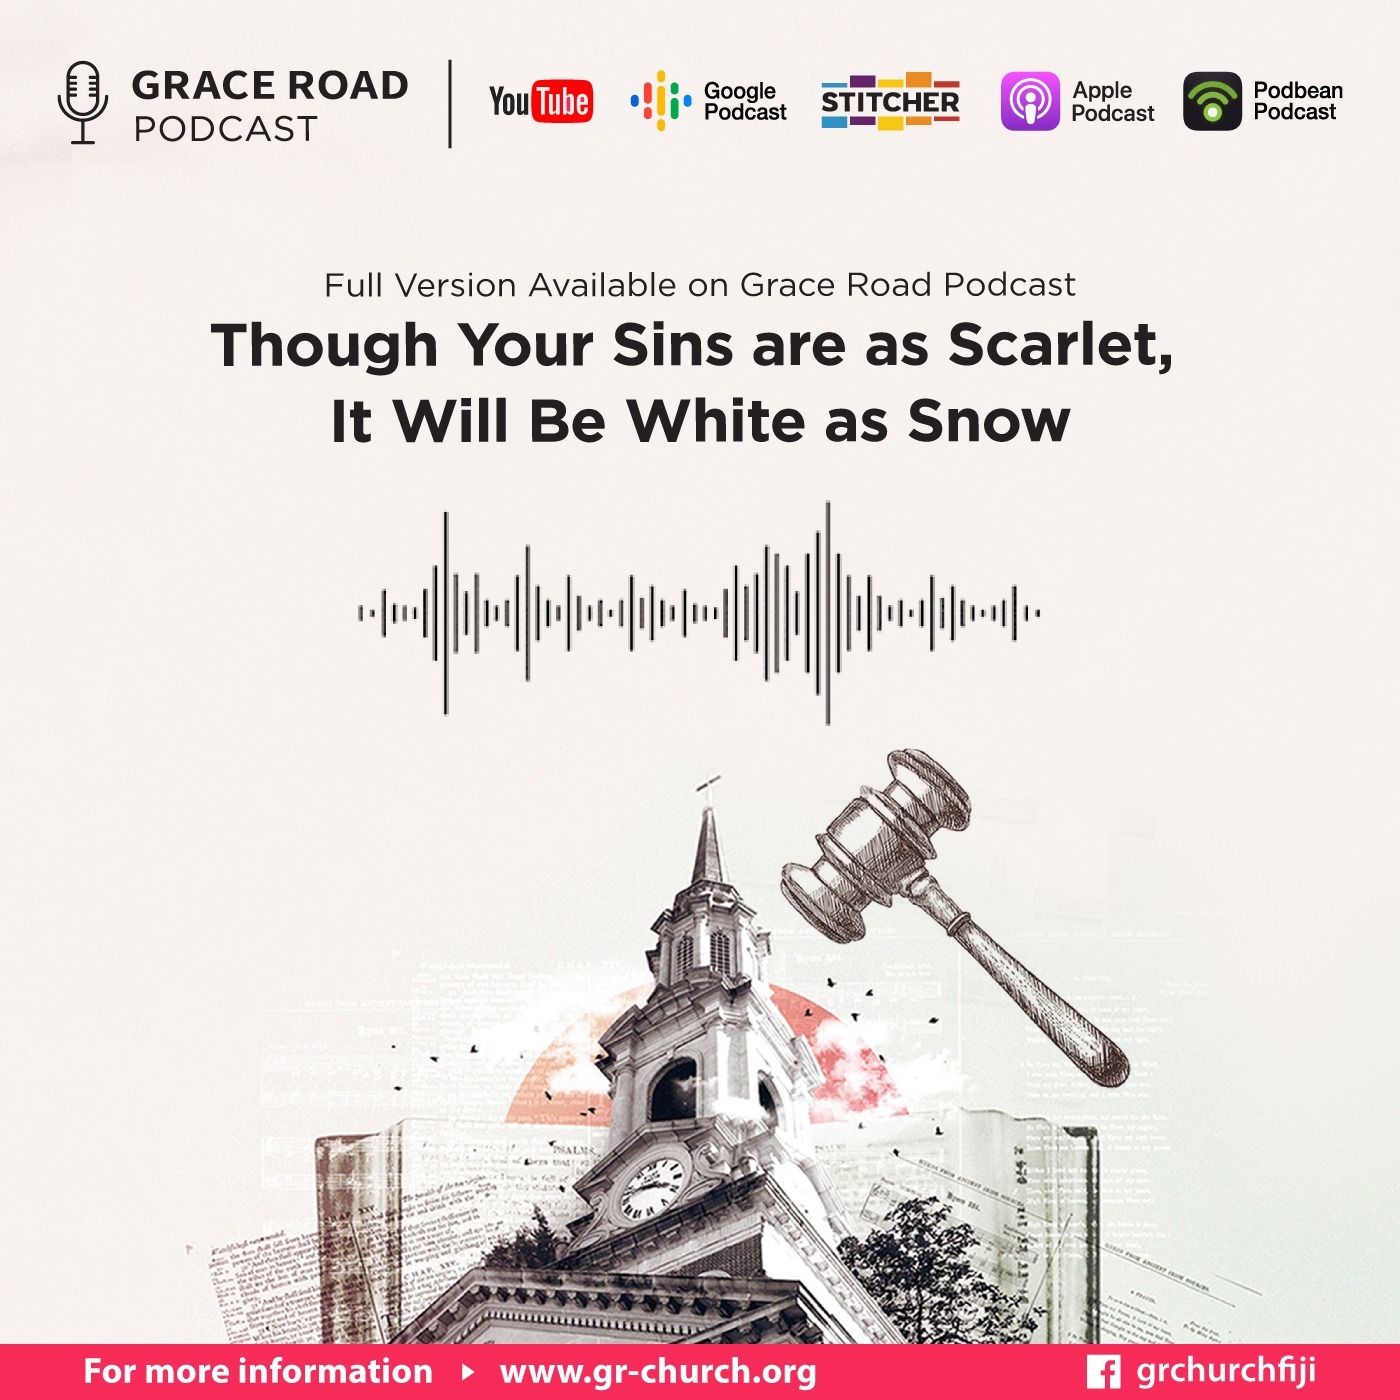 [Trailer]Though Your Sins Are Like Scarlet, It Will Be White as Snow